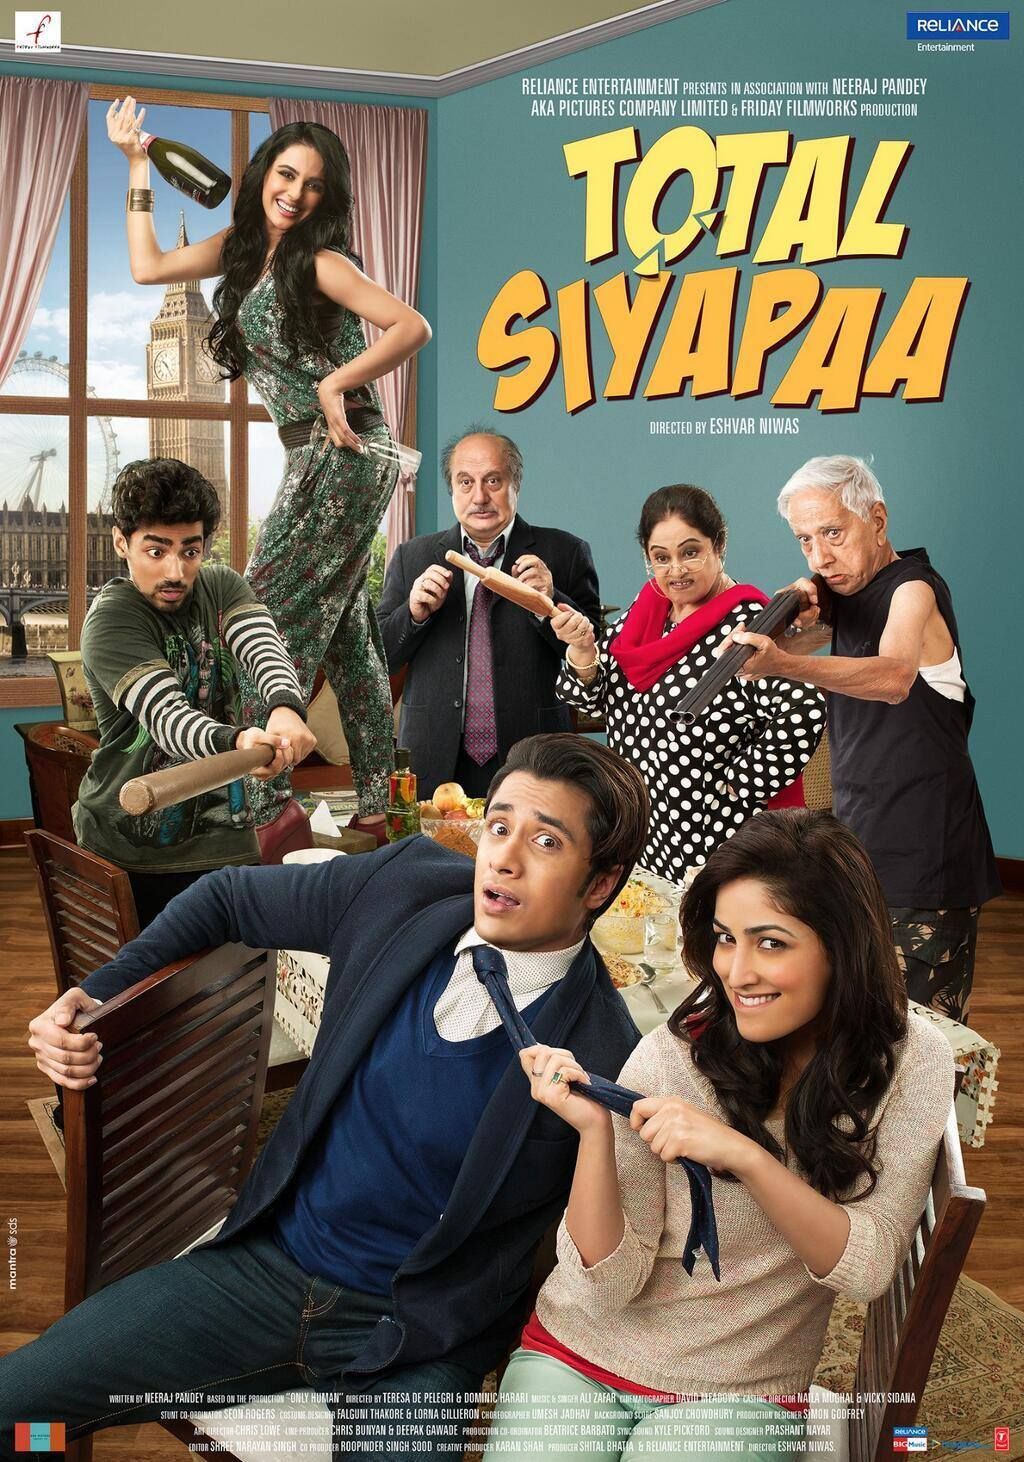 Total Siyappa out with its first official trailer featuring Ali Zafar and Yami Gautam